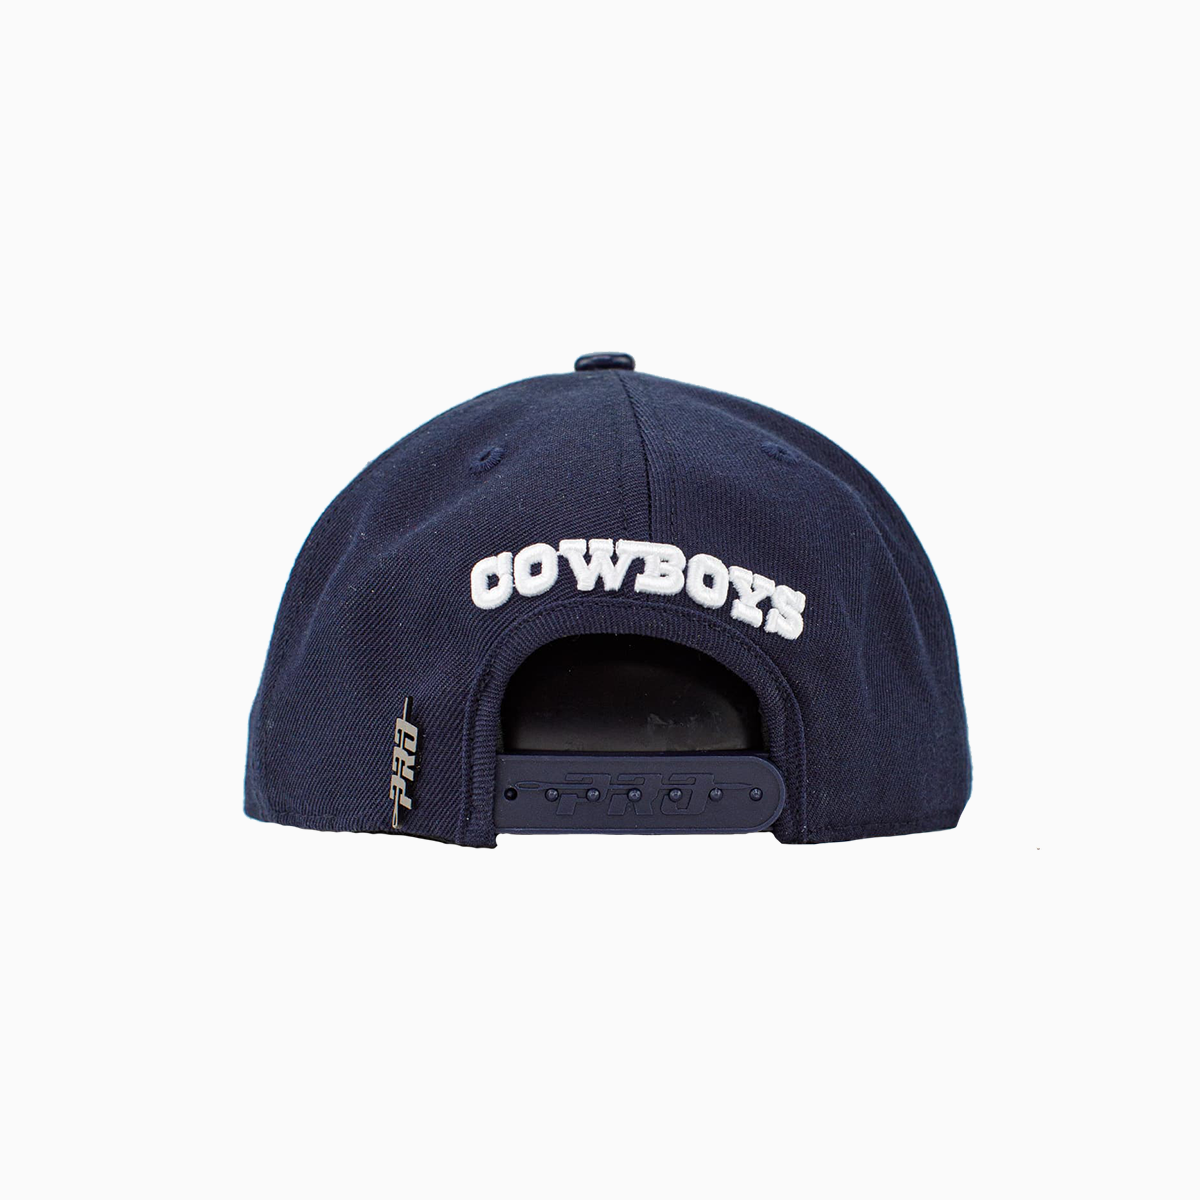 Pro Standard Men's Dallas Cowboy Snapback Hat - Color: Midnight Navy - Tops and Bottoms USA -